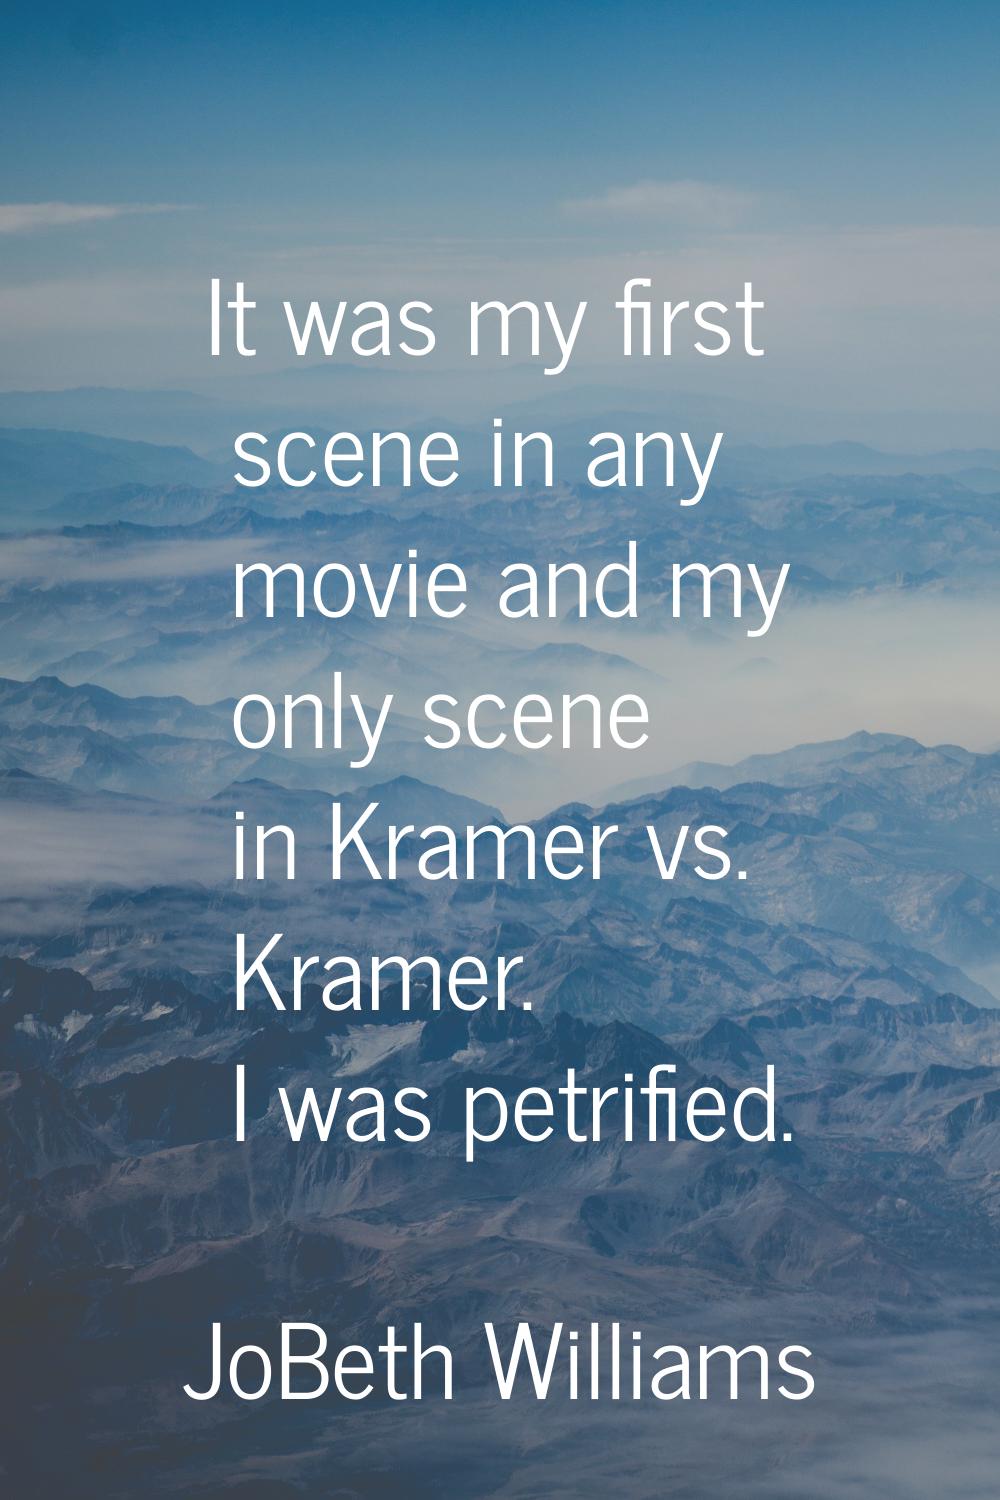 It was my first scene in any movie and my only scene in Kramer vs. Kramer. I was petrified.